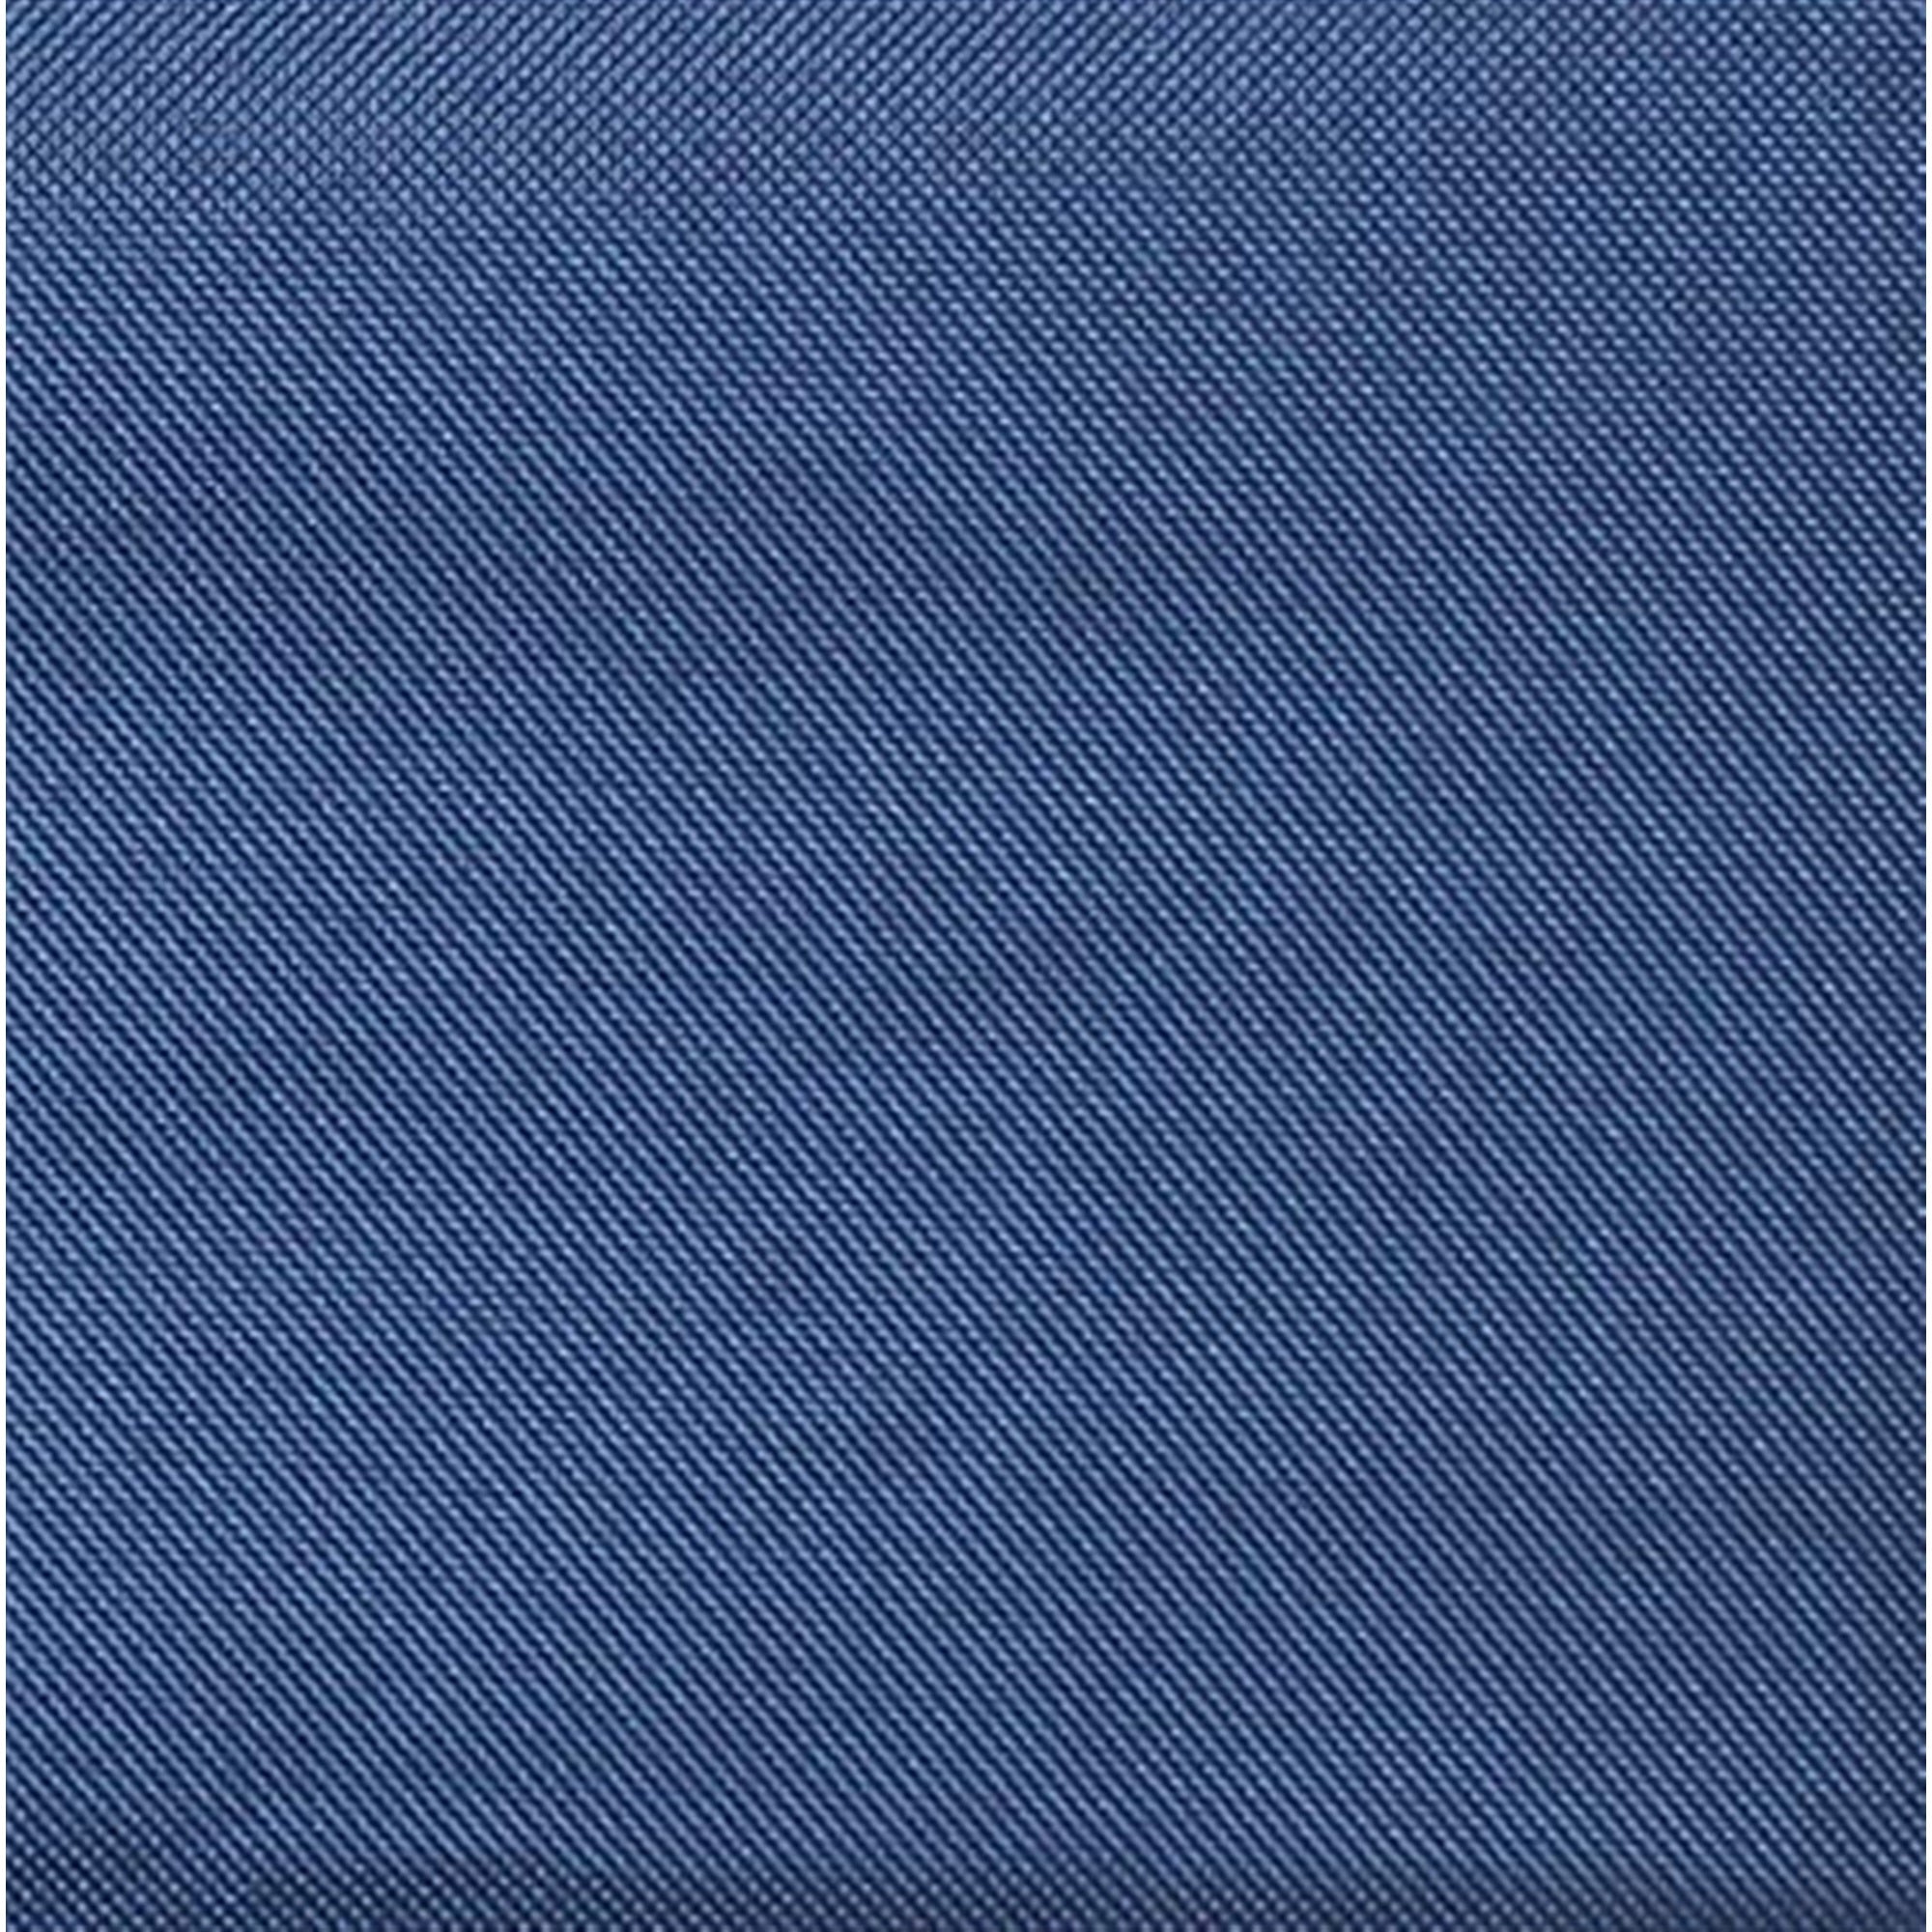 Zenithen High Tension Folding Portable Fabric Table With Cup Holders Dark Blue